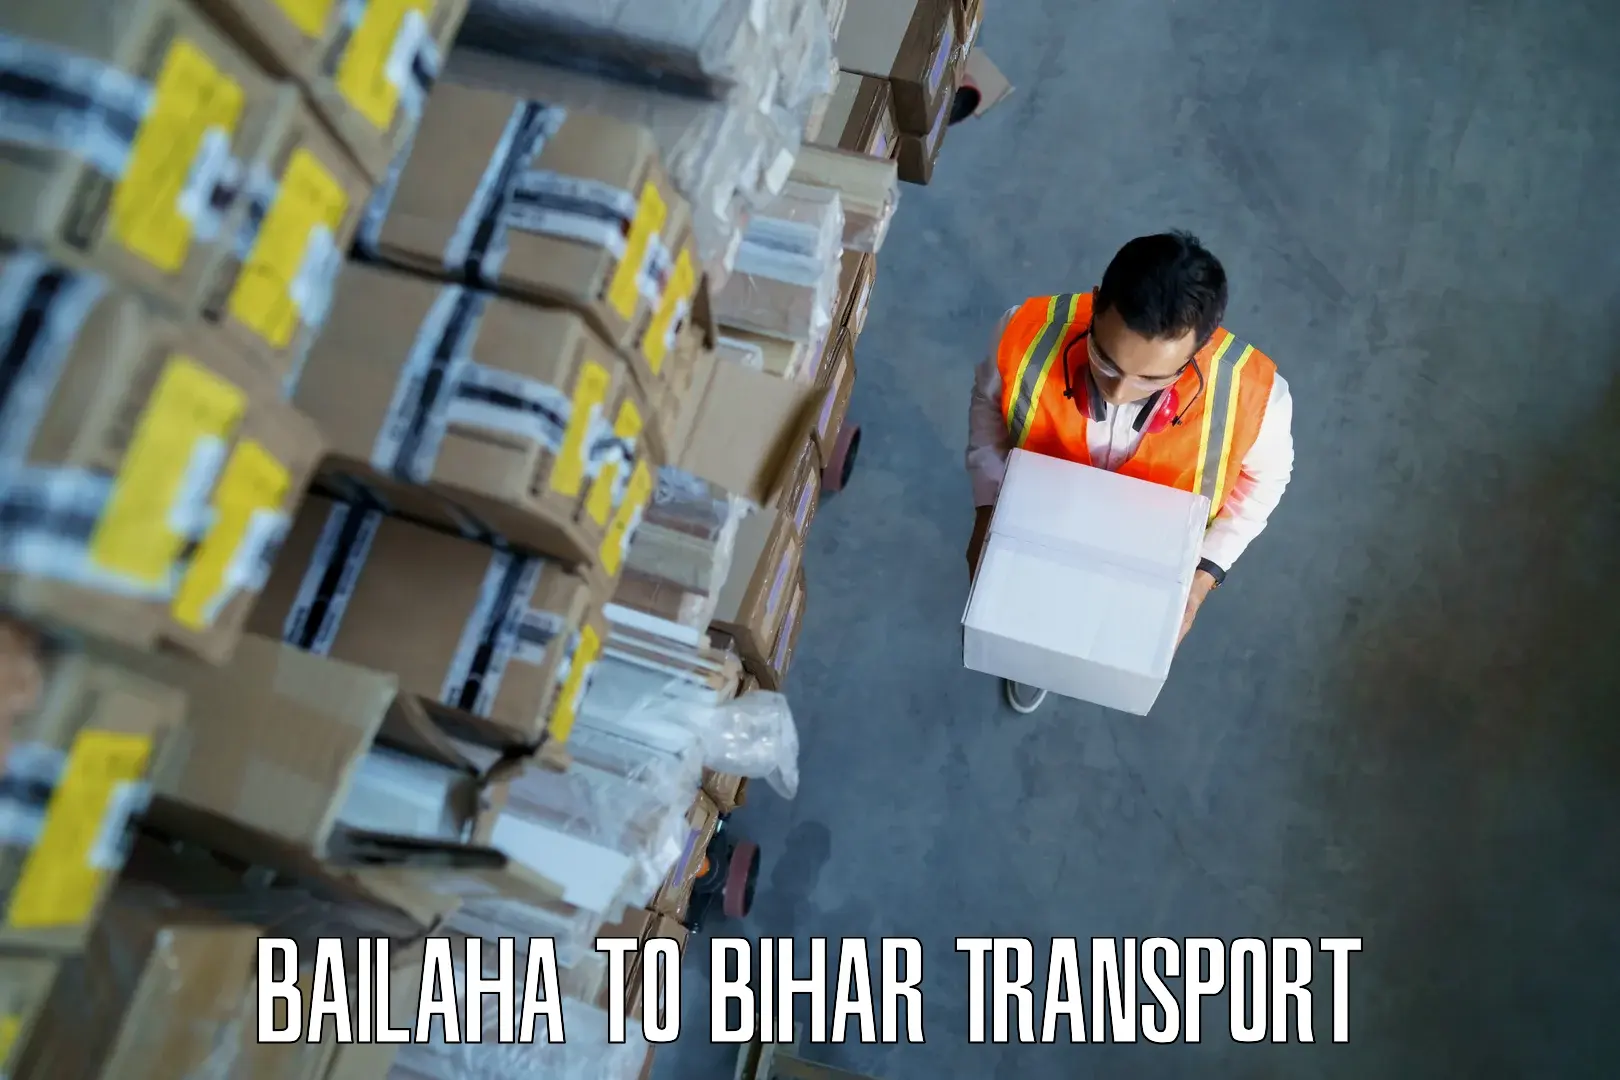 Container transport service Bailaha to Sheohar